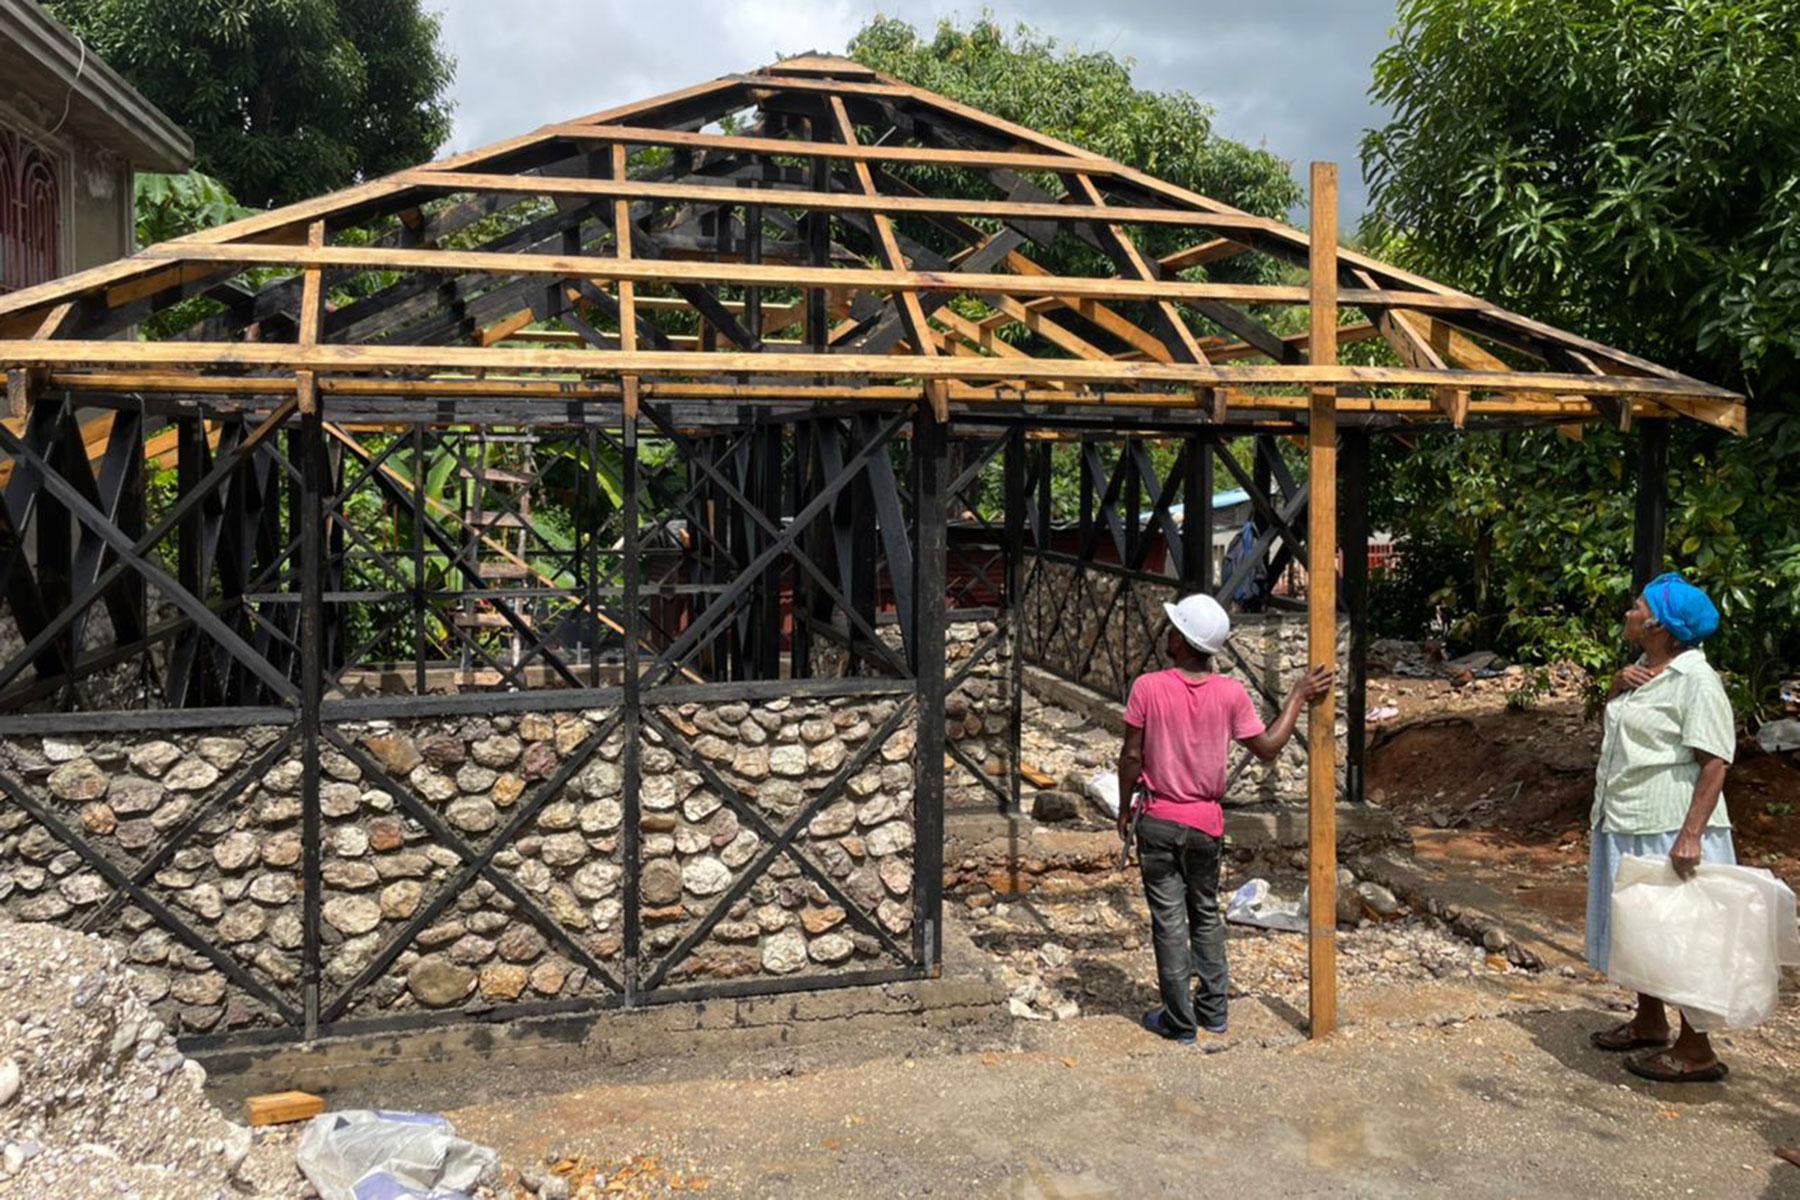 As part of the housing construction project, participants provide rocks, wood and food for the construction workers. Marie Nusia, a project participant, observes the progress on her new hurricane and earthquake resistant home. Photo: LWF Haiti